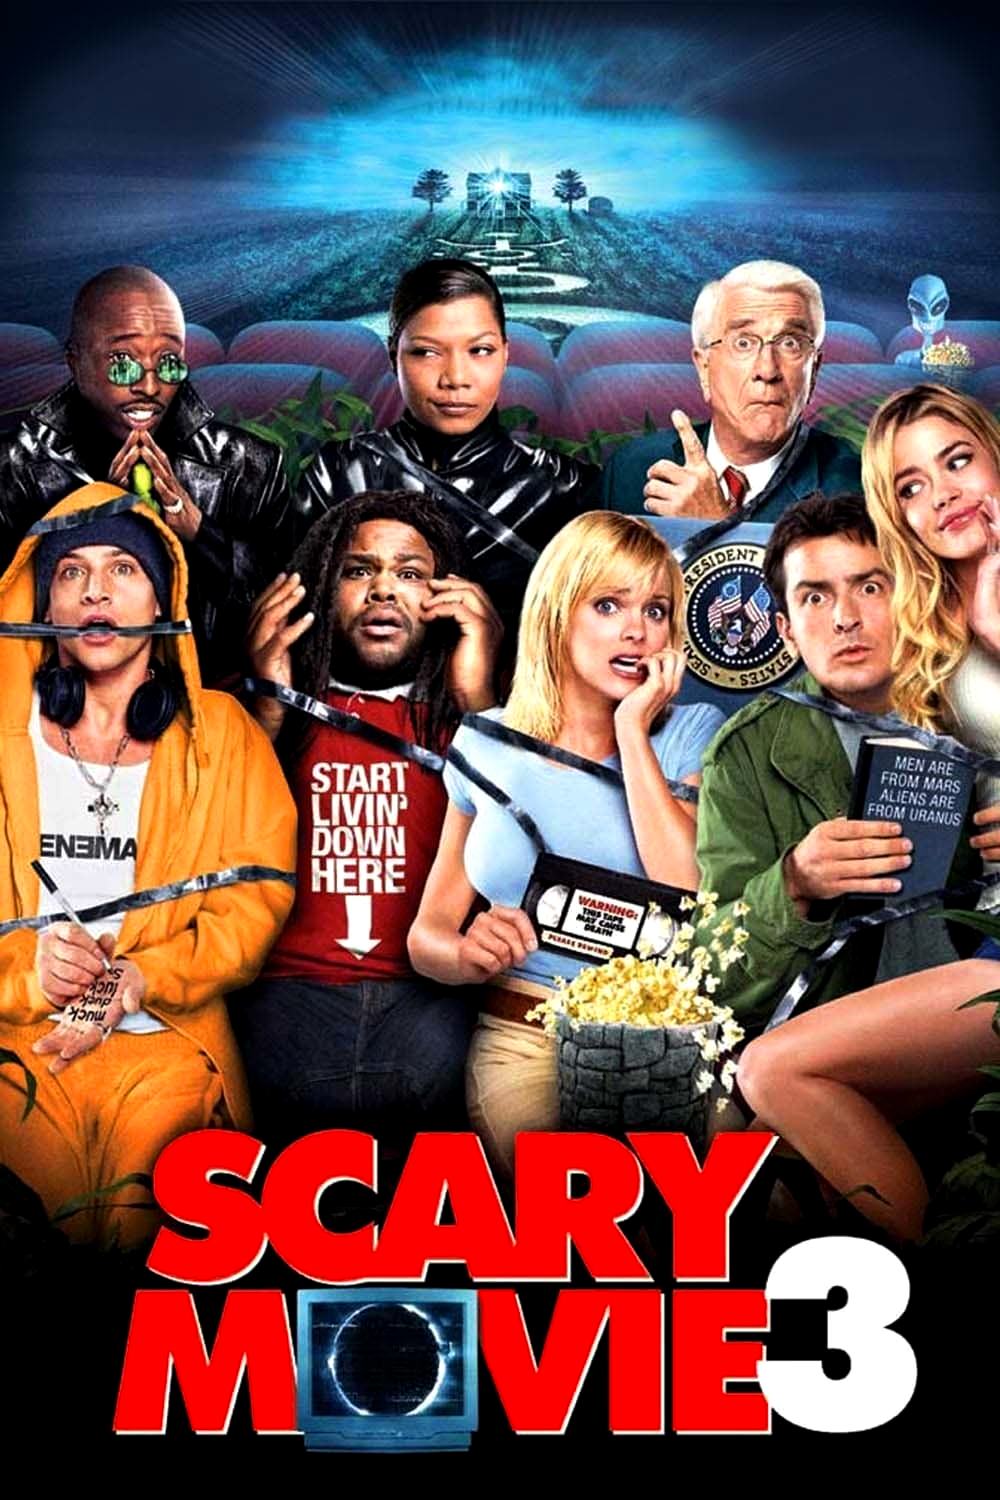 Scary Movie 3 [HD] (2003)